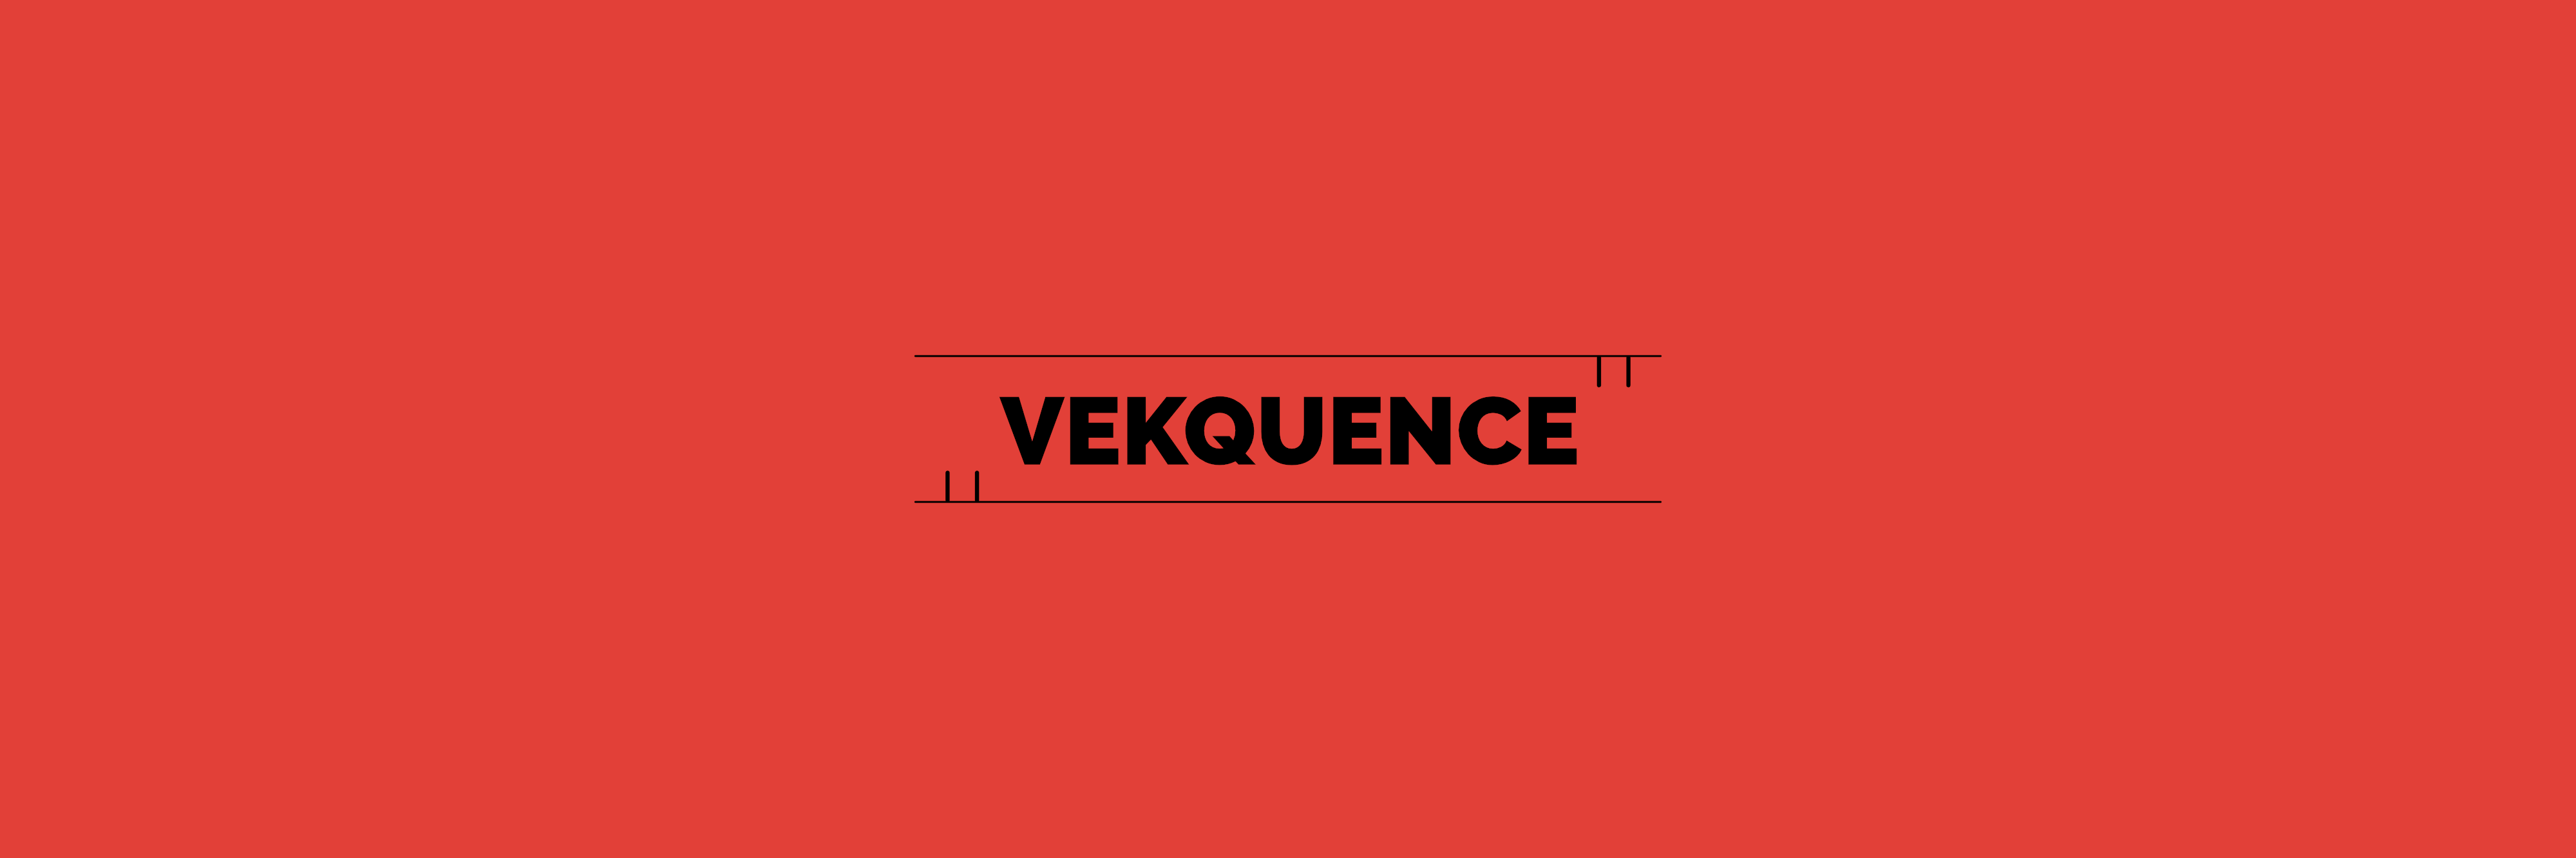 Vekquence